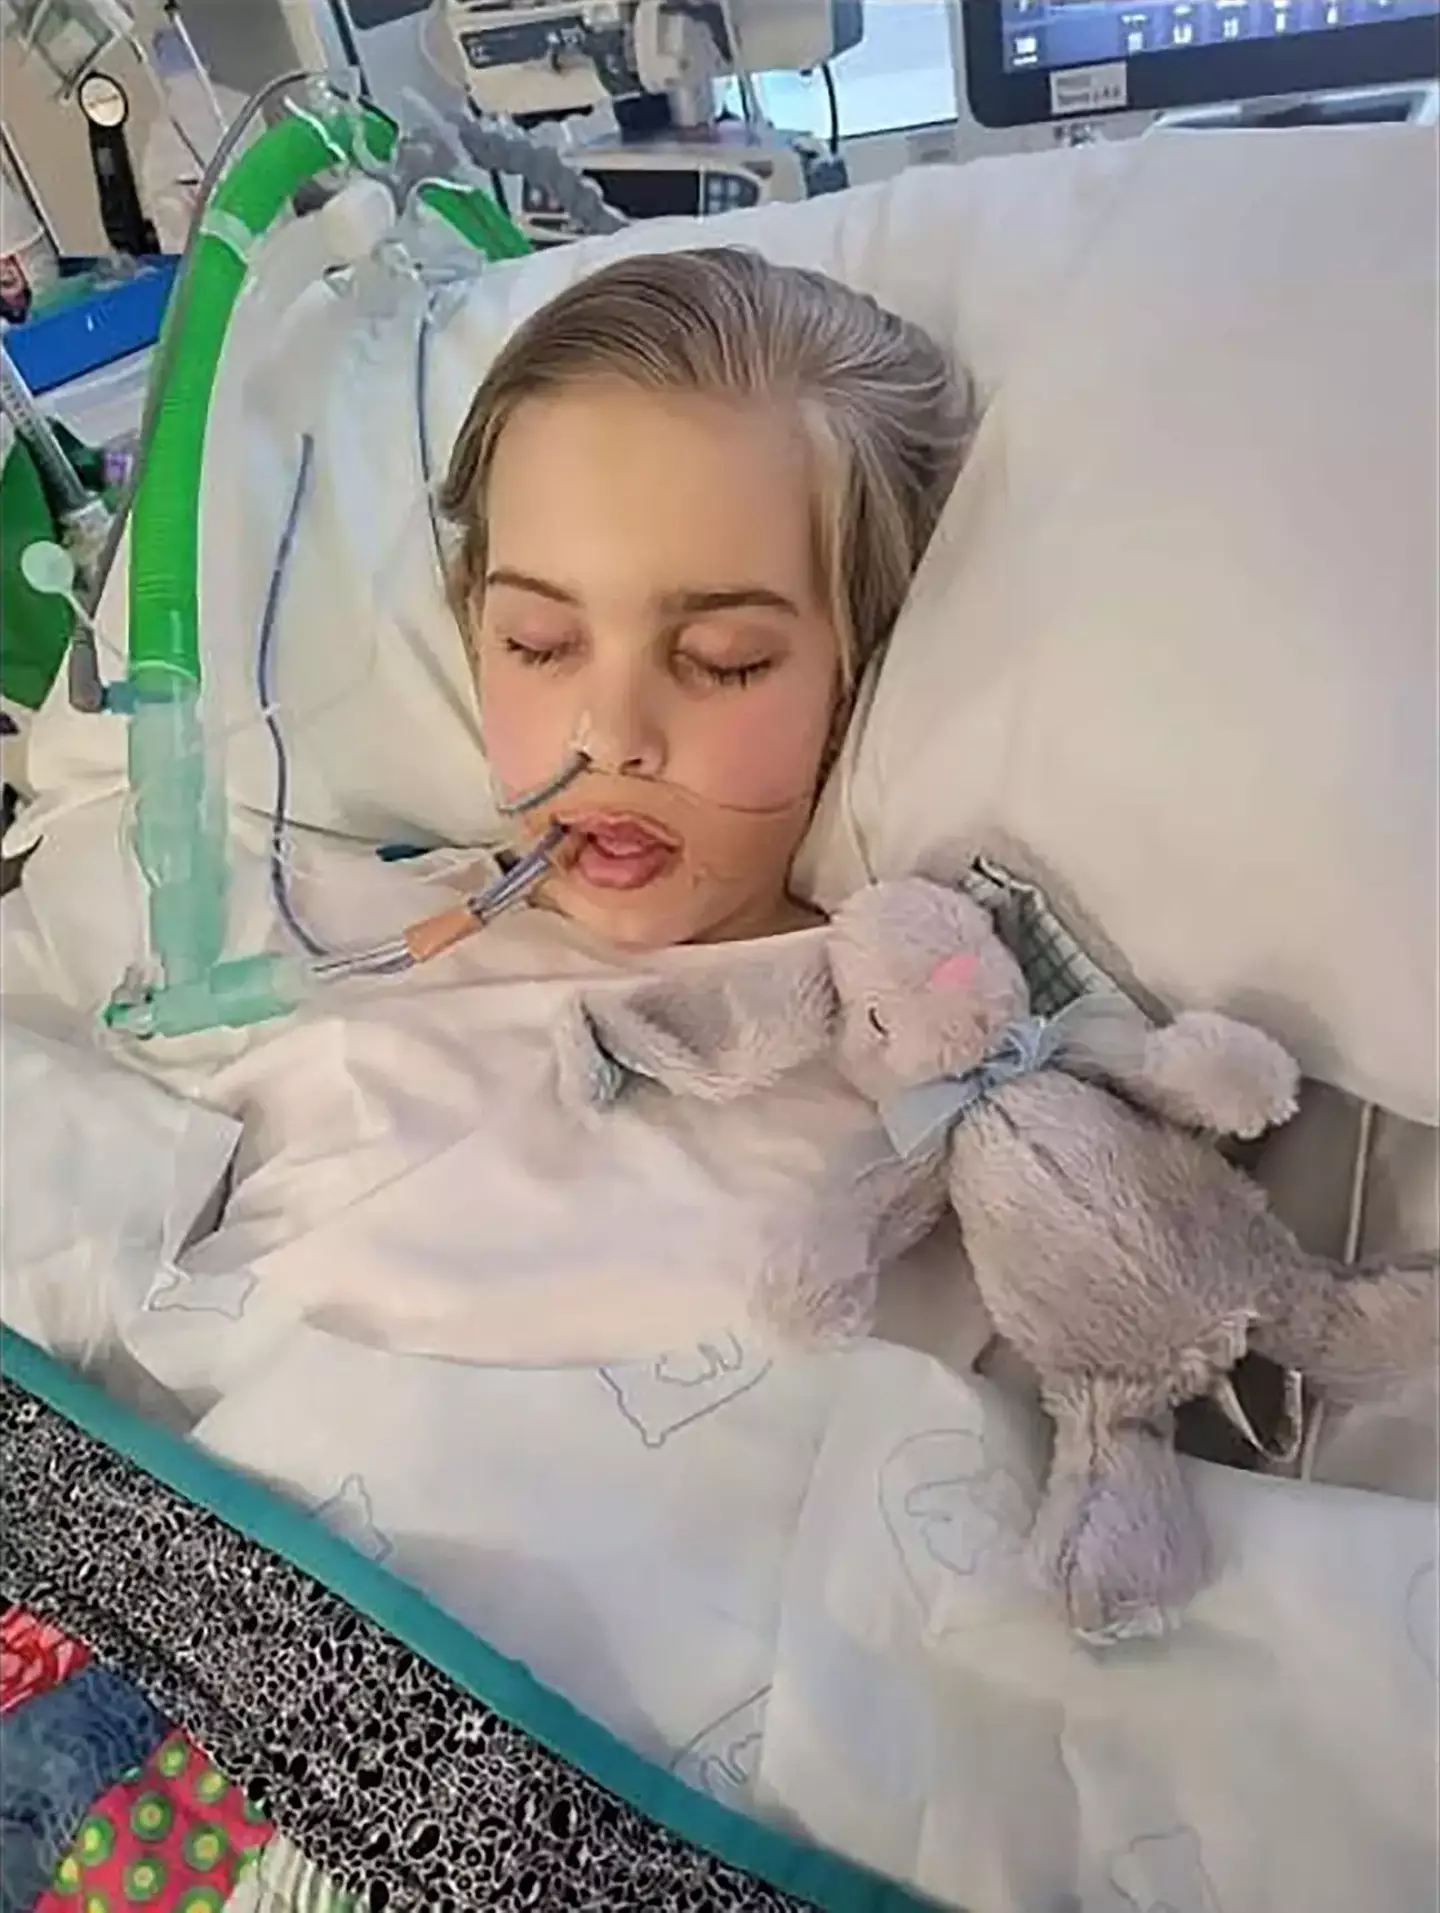 The 12-year-old has been on life support since April, with the treatment set to be withdrawn later today.